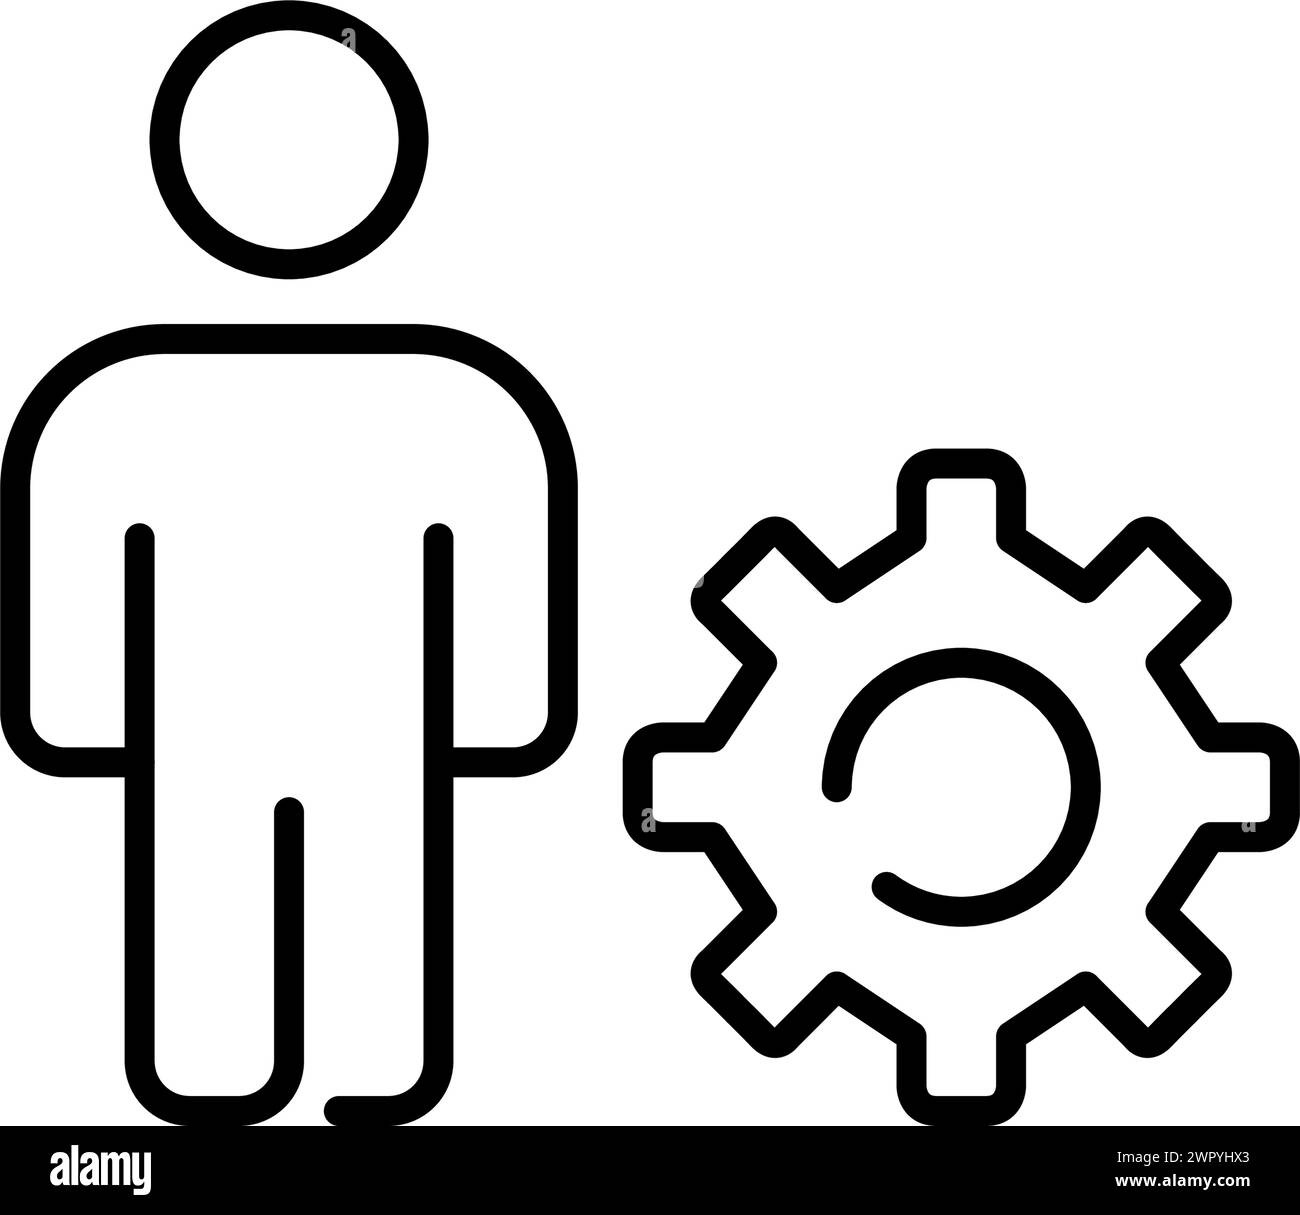 Digital engineering icon. Technical professional. Person and cogwheel symbolizing power solving skills and expertise Stock Vector